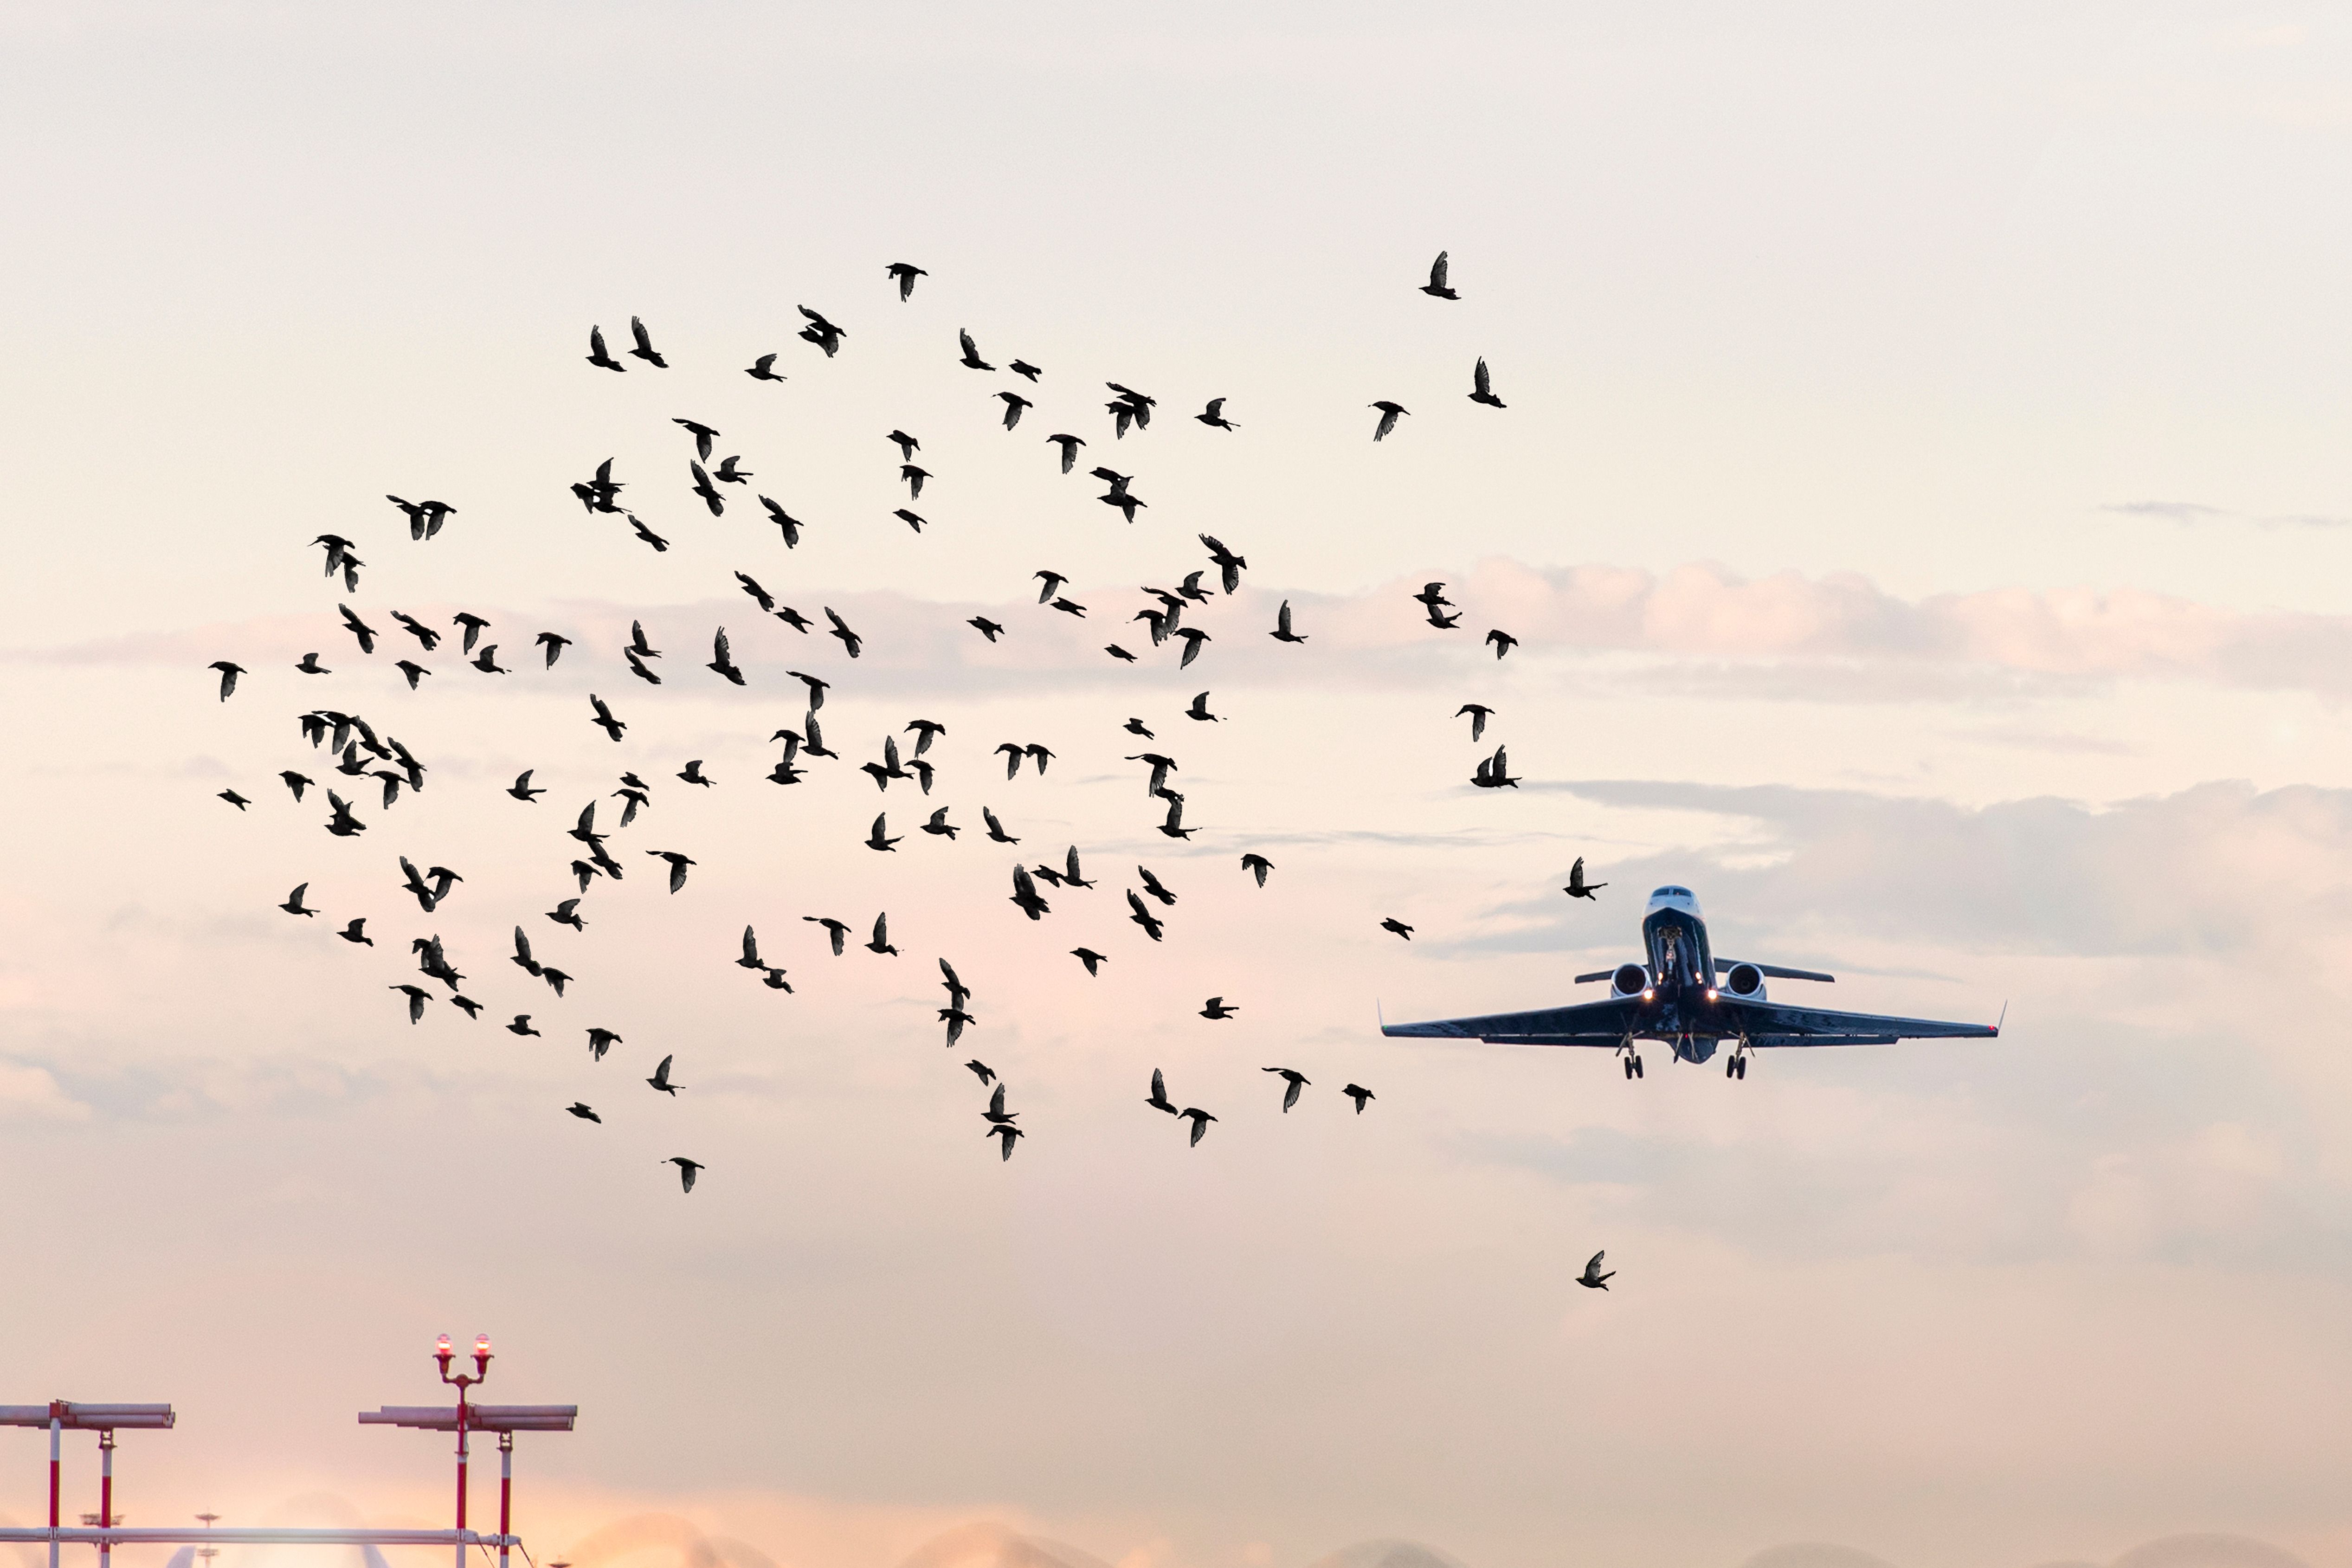 A Flock of birds flying in front of an airplane just after it takes off.